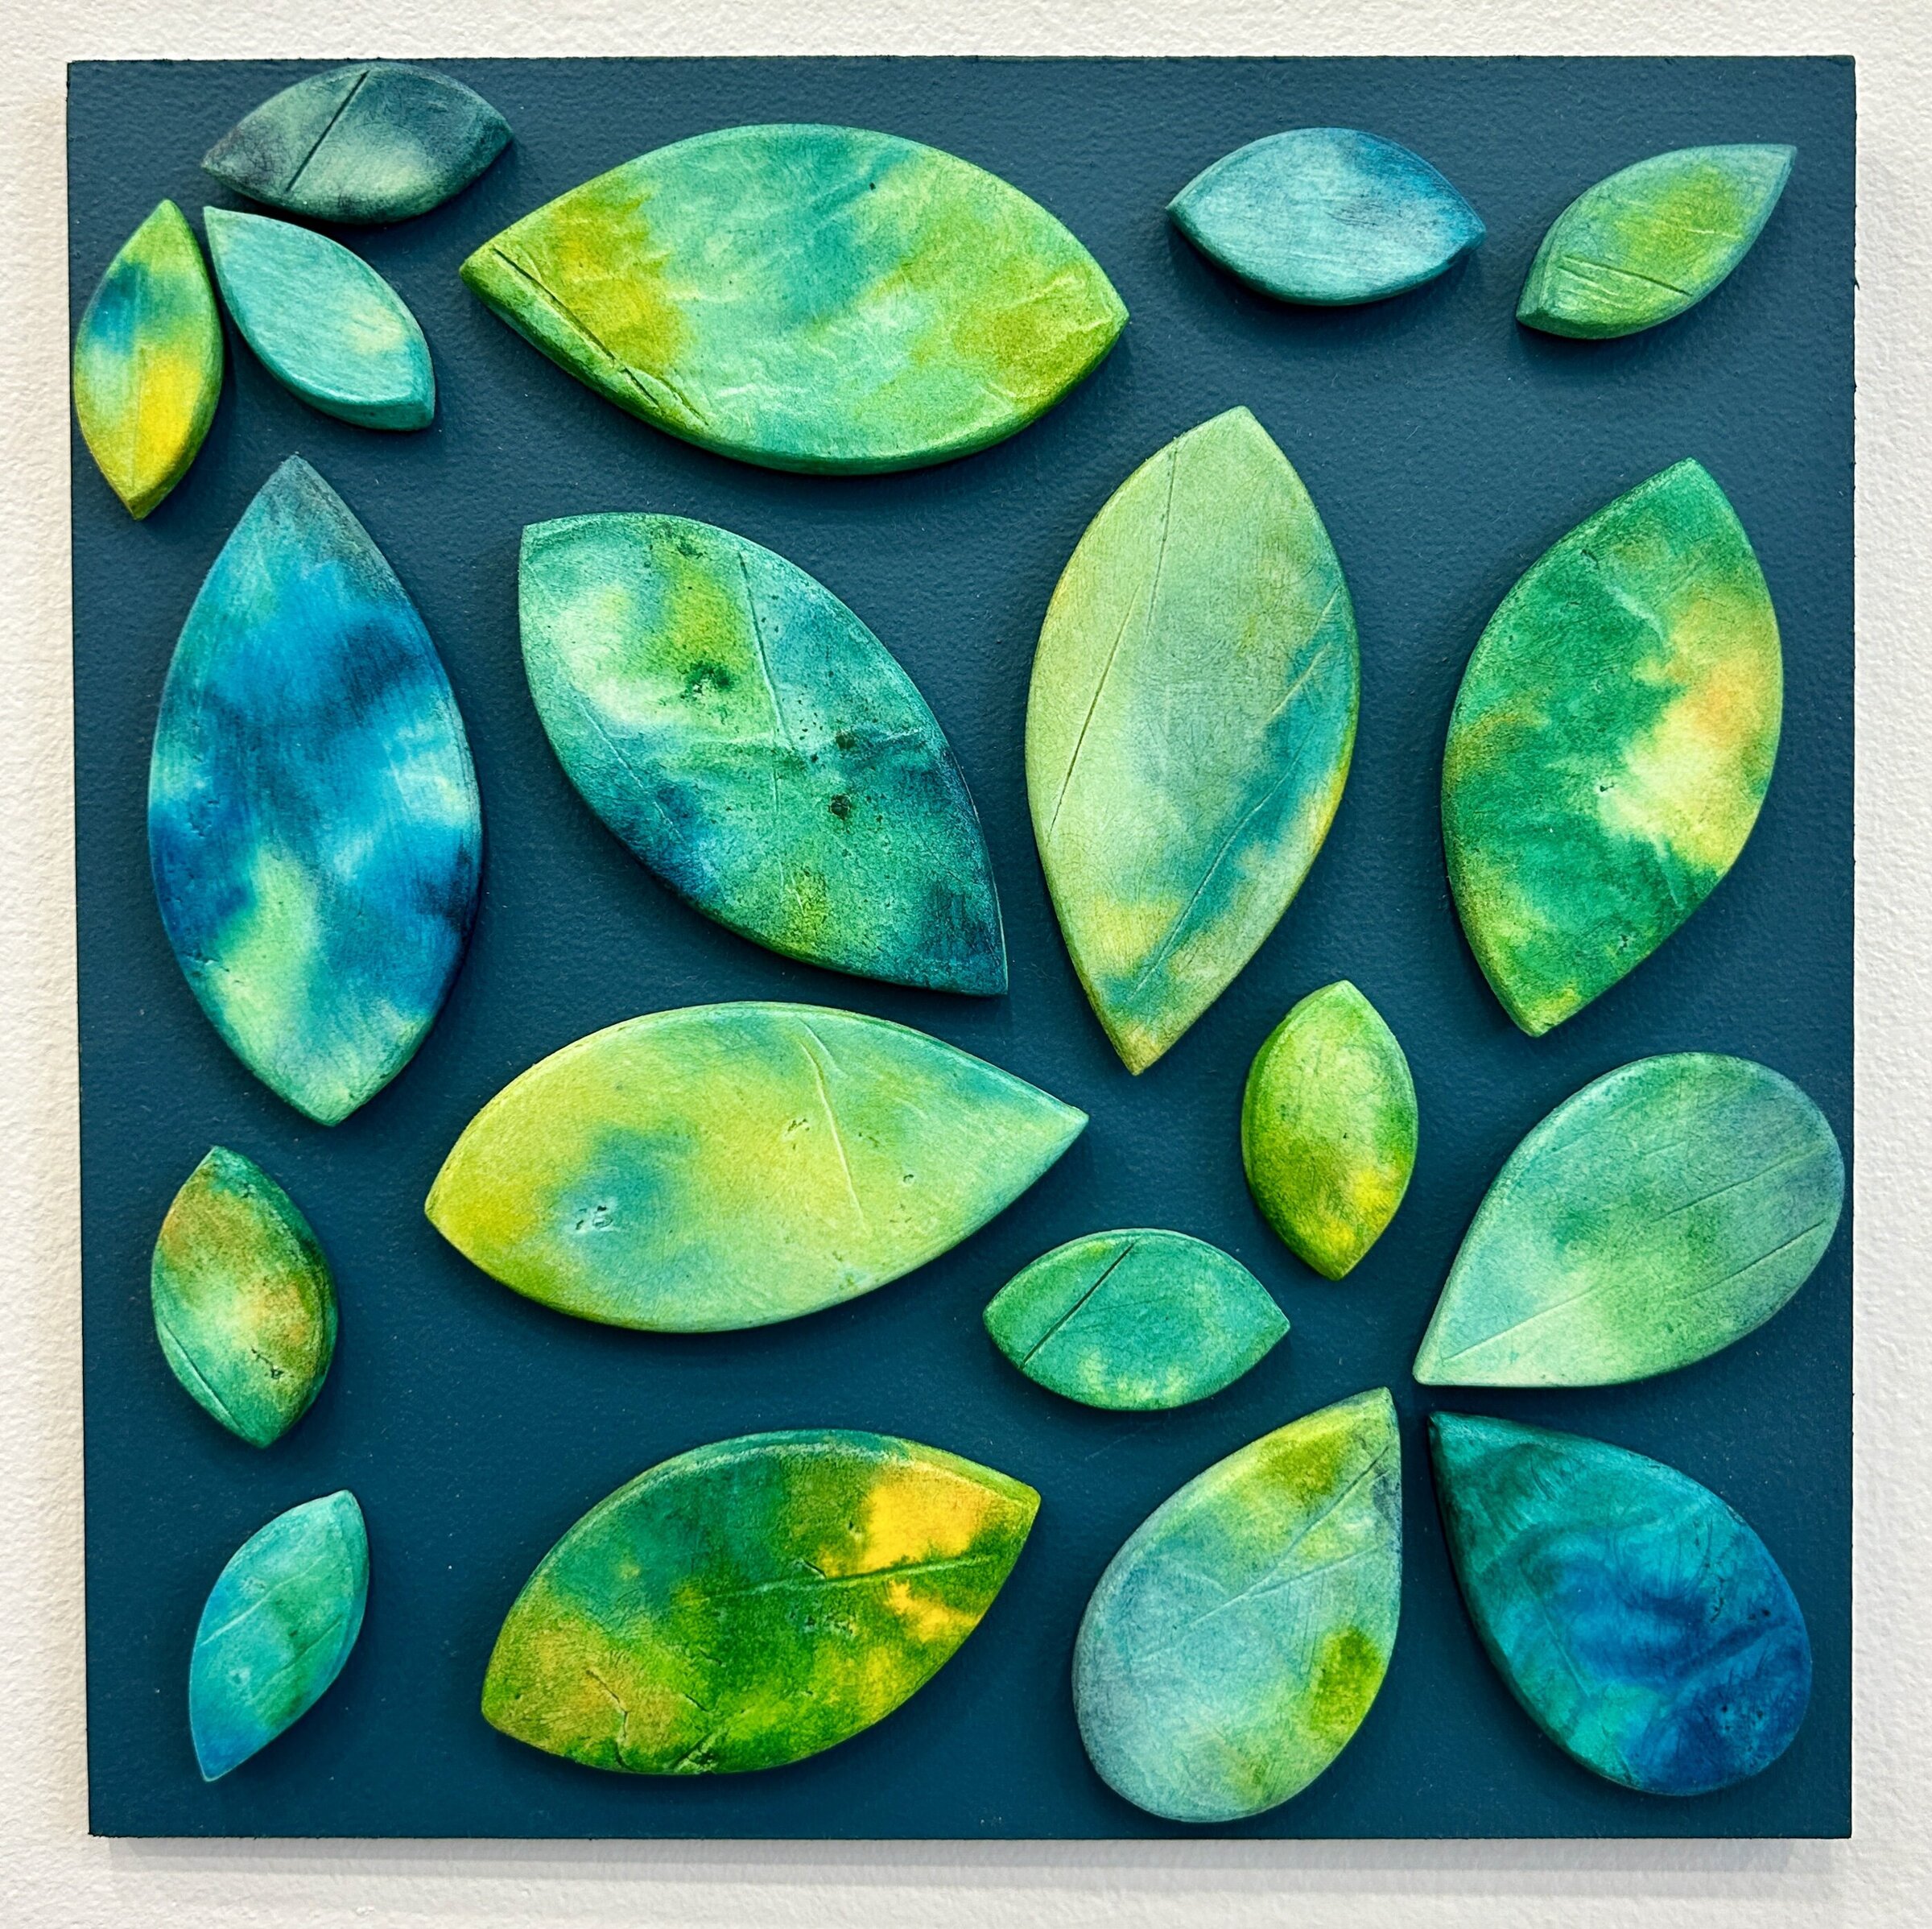 Emily Mann, Ink and Indigo, customizable dimensional wall art, paperclay forms with watercolor on panel, 8”x8”-3